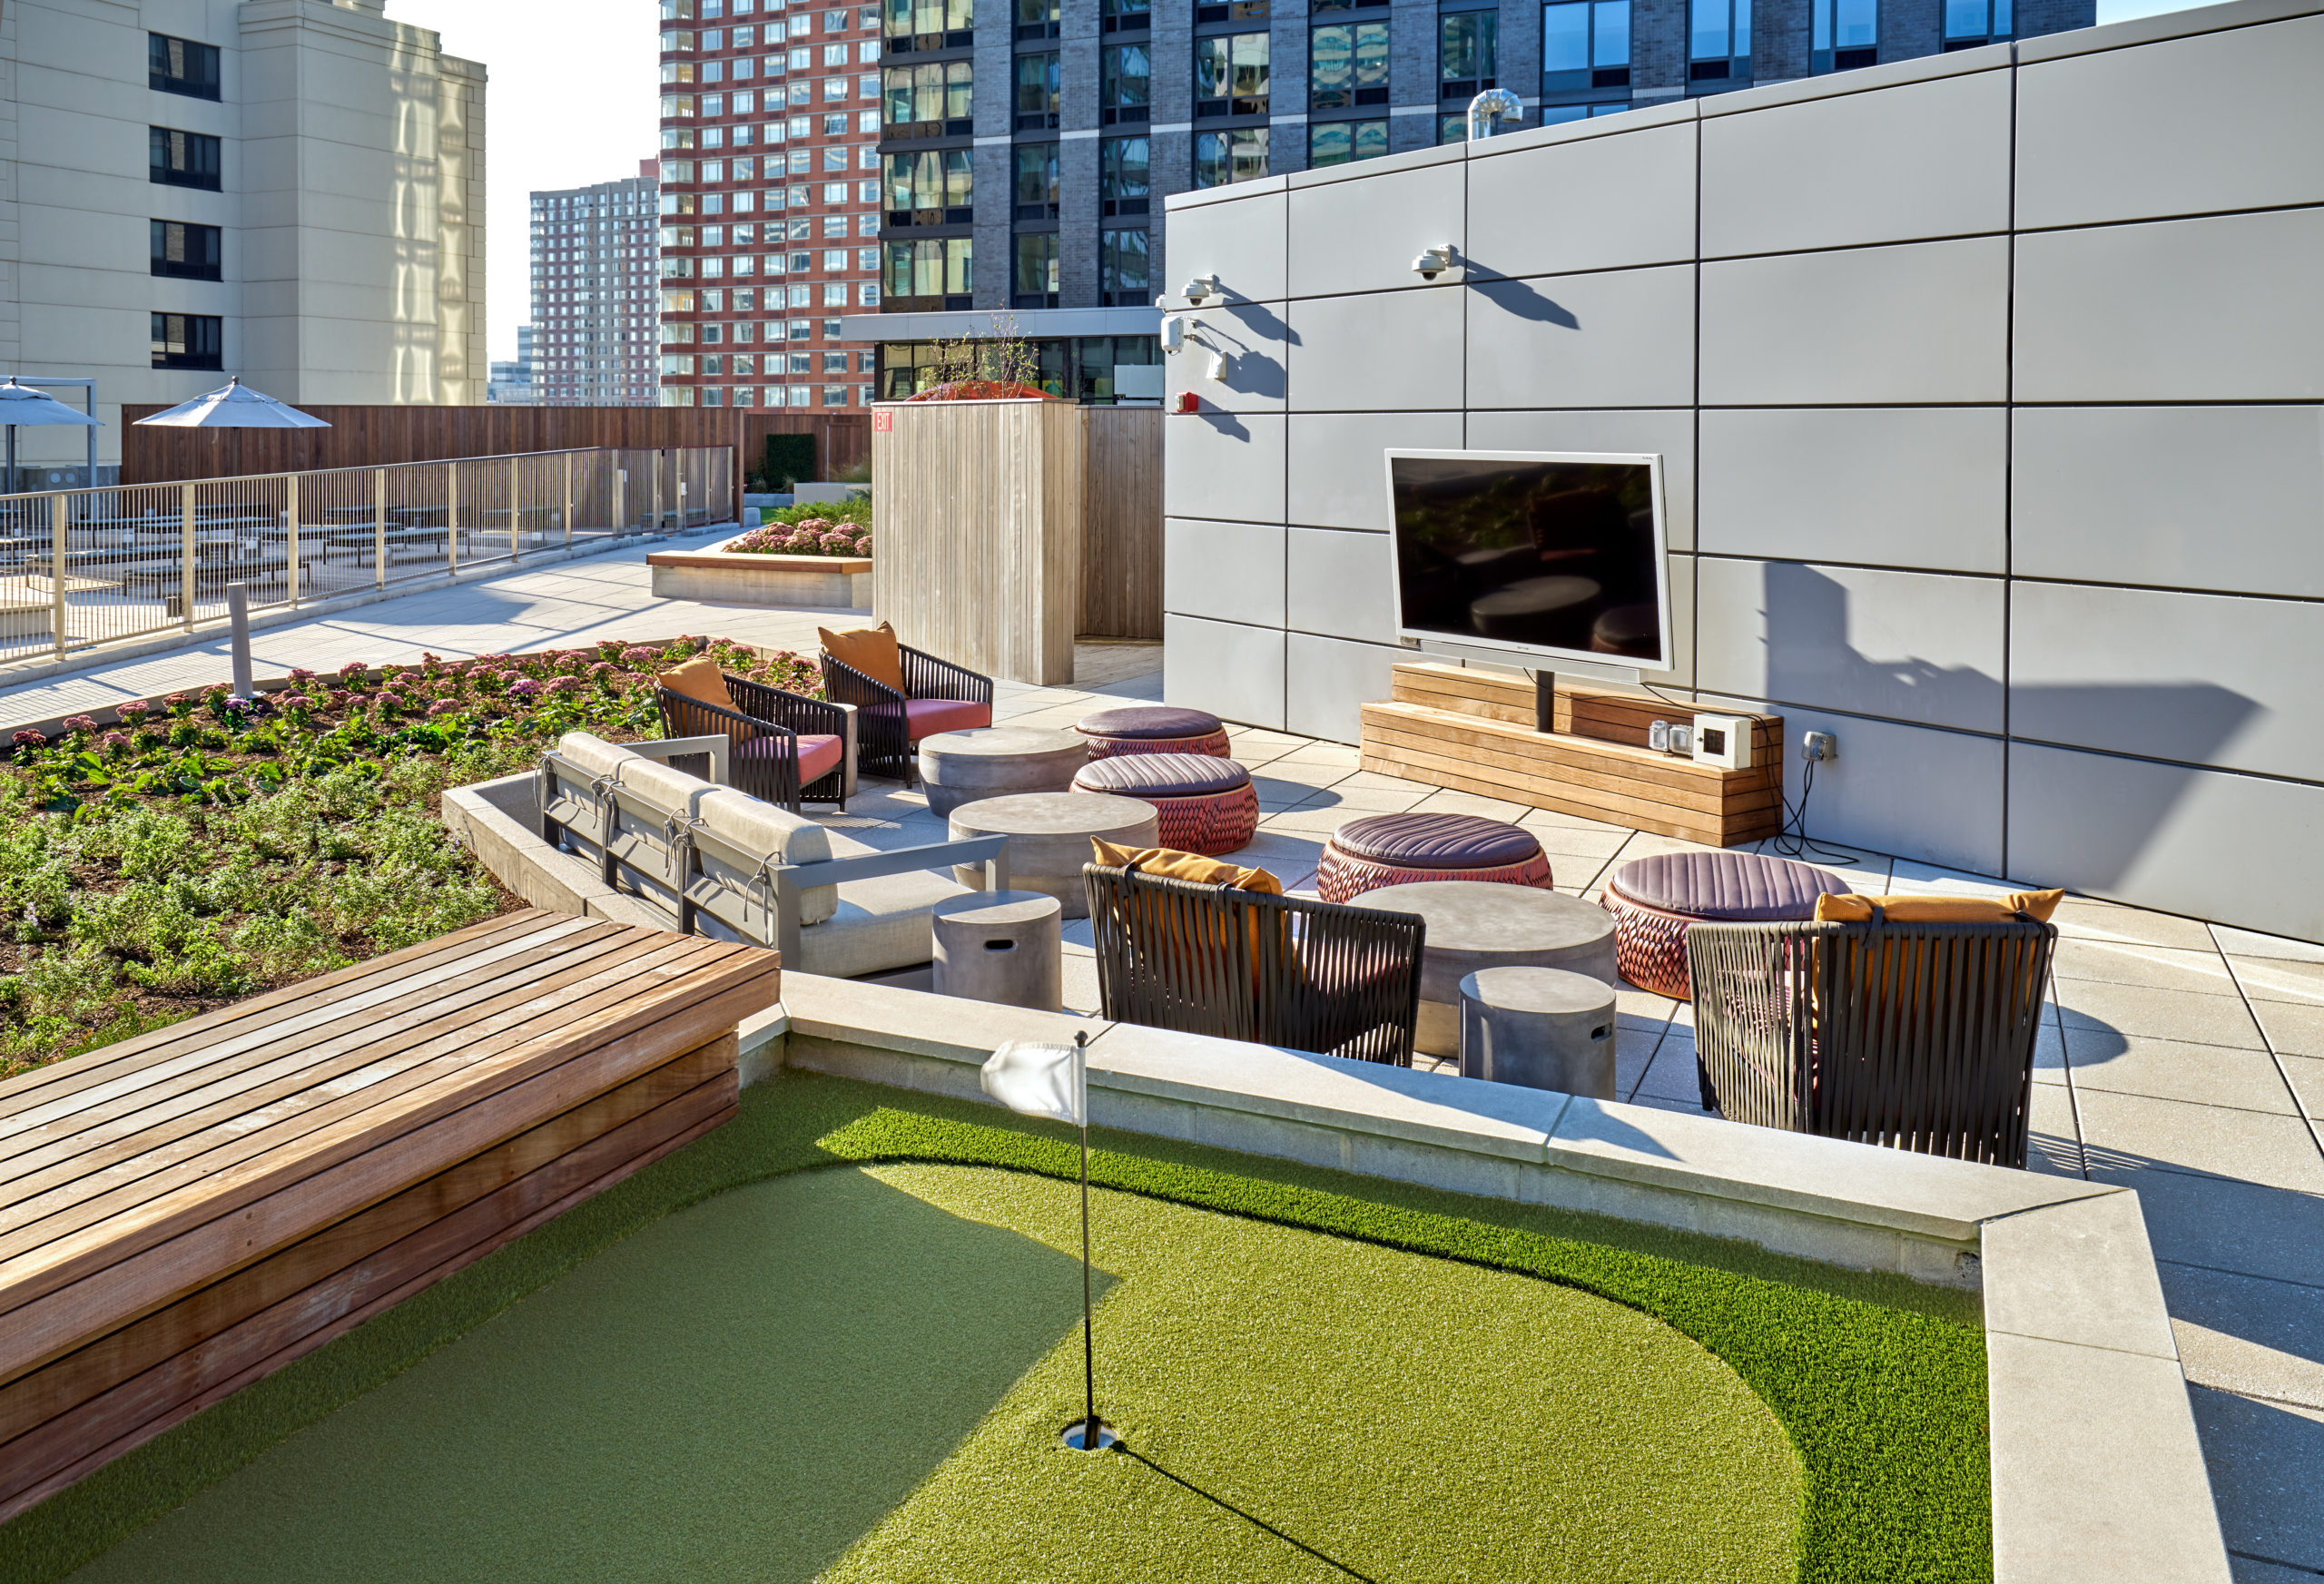 vyv south rooftop putting green